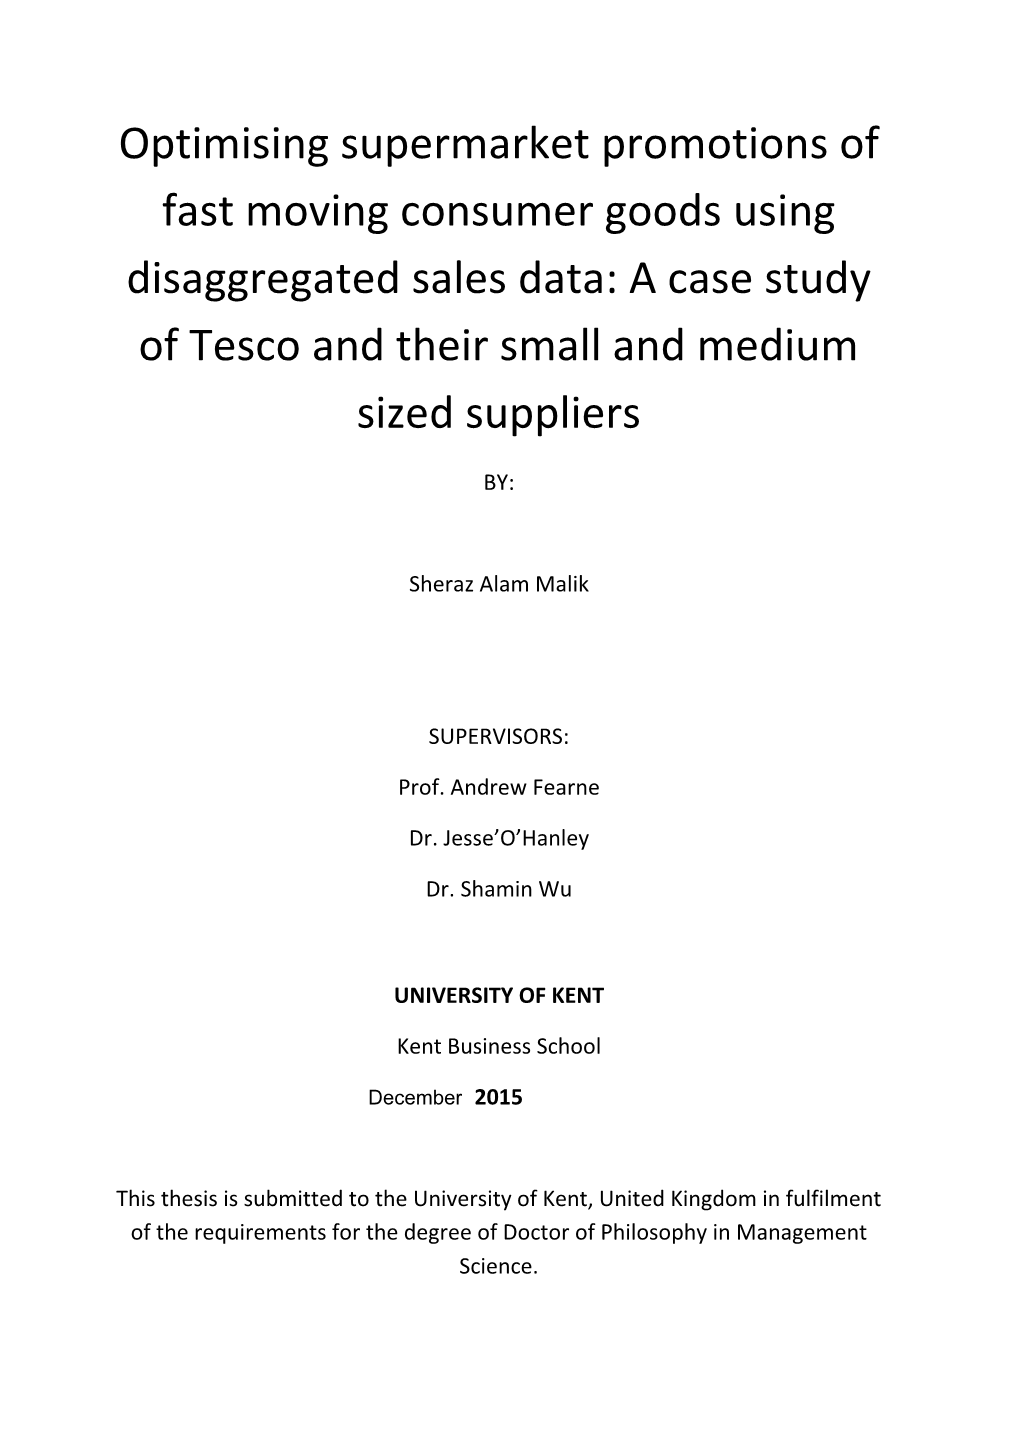 Optimising Supermarket Promotions of Fast Moving Consumer Goods Using Disaggregated Sales Data: a Case Study of Tesco and Their Small and Medium